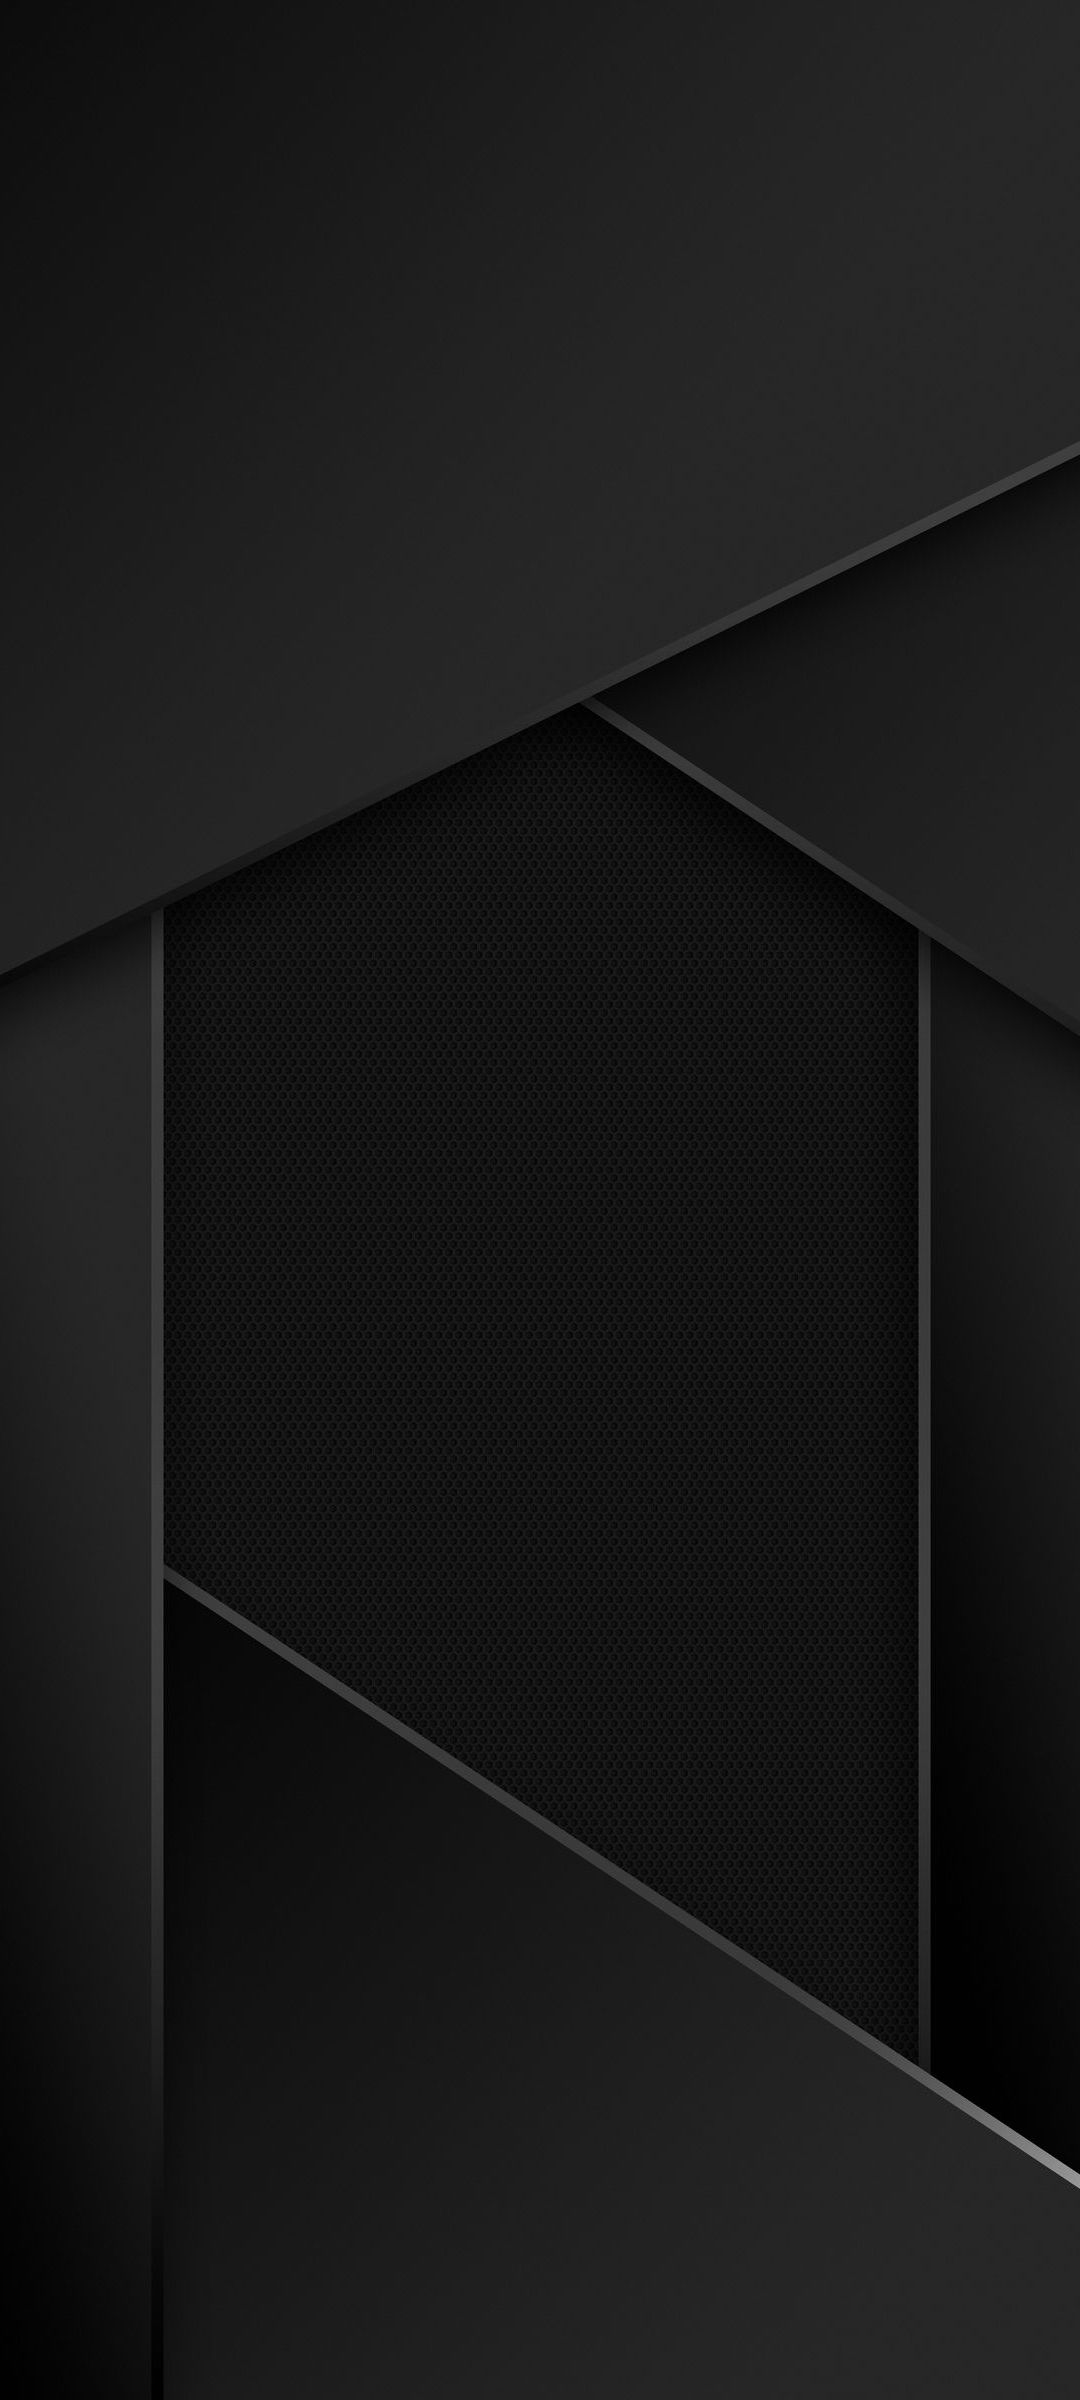 Pure Black Mobile Wallpapers - Wallpaper Cave